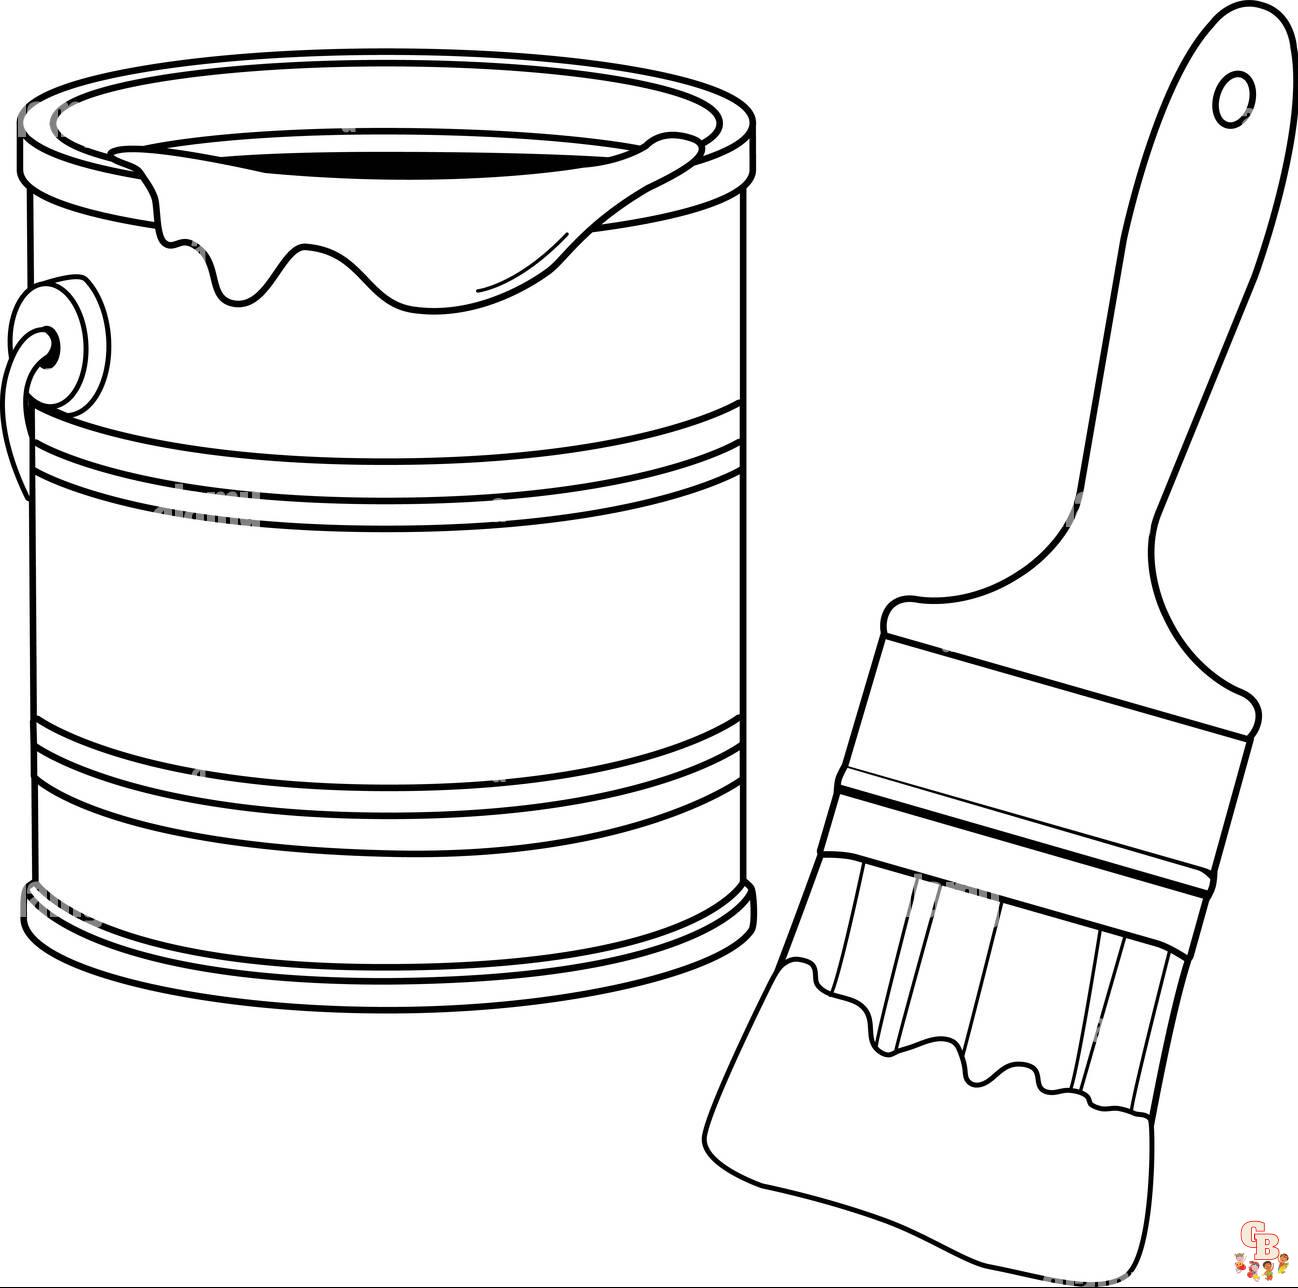 Paint Coloring Pages: Creative Fun for Kids